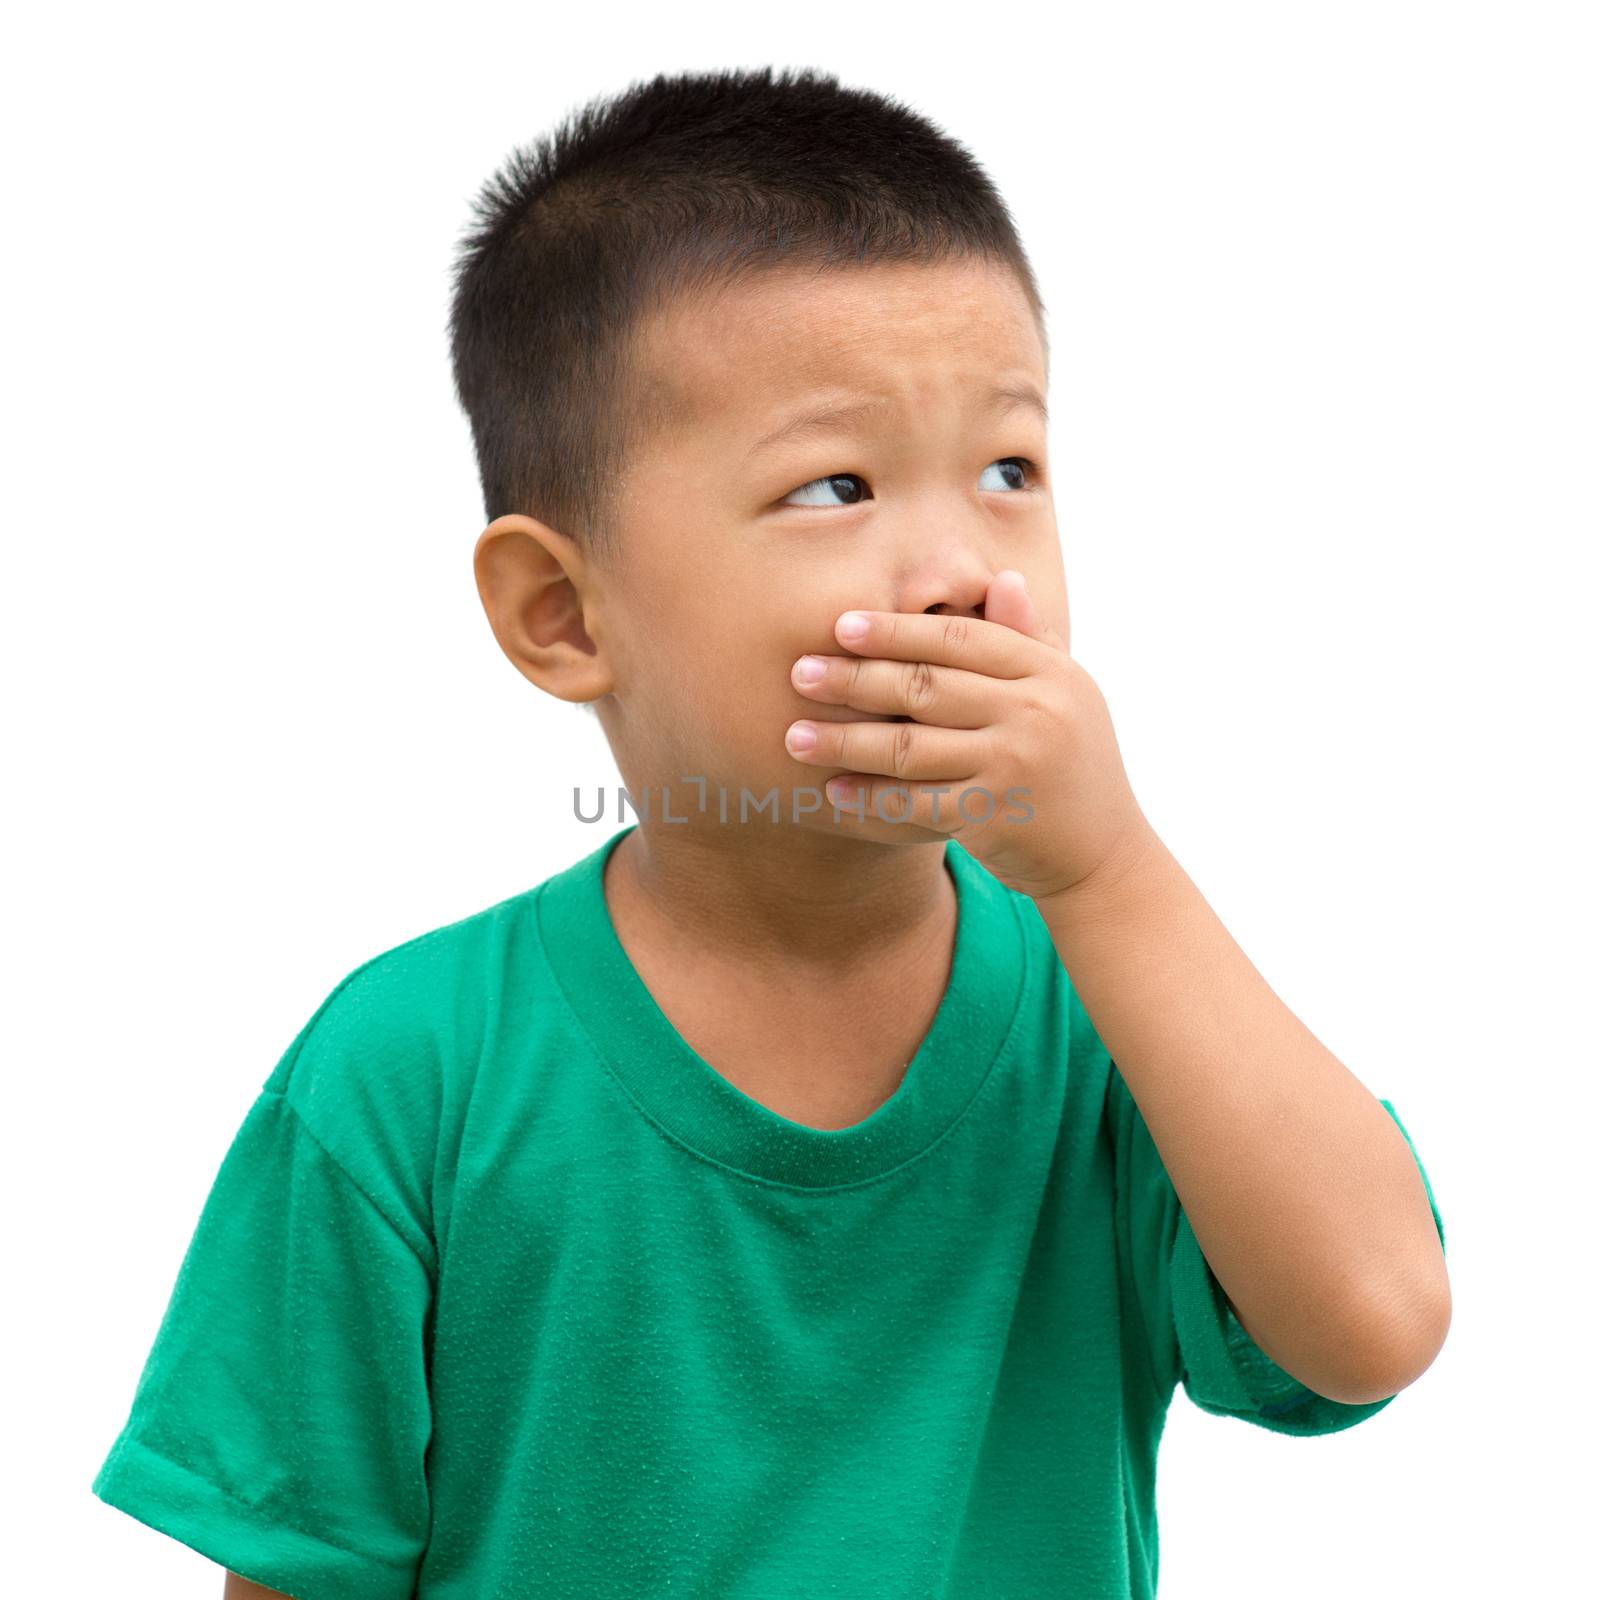 Asian child covering his mouth and looking to side. Portrait of young boy isolated on white background.